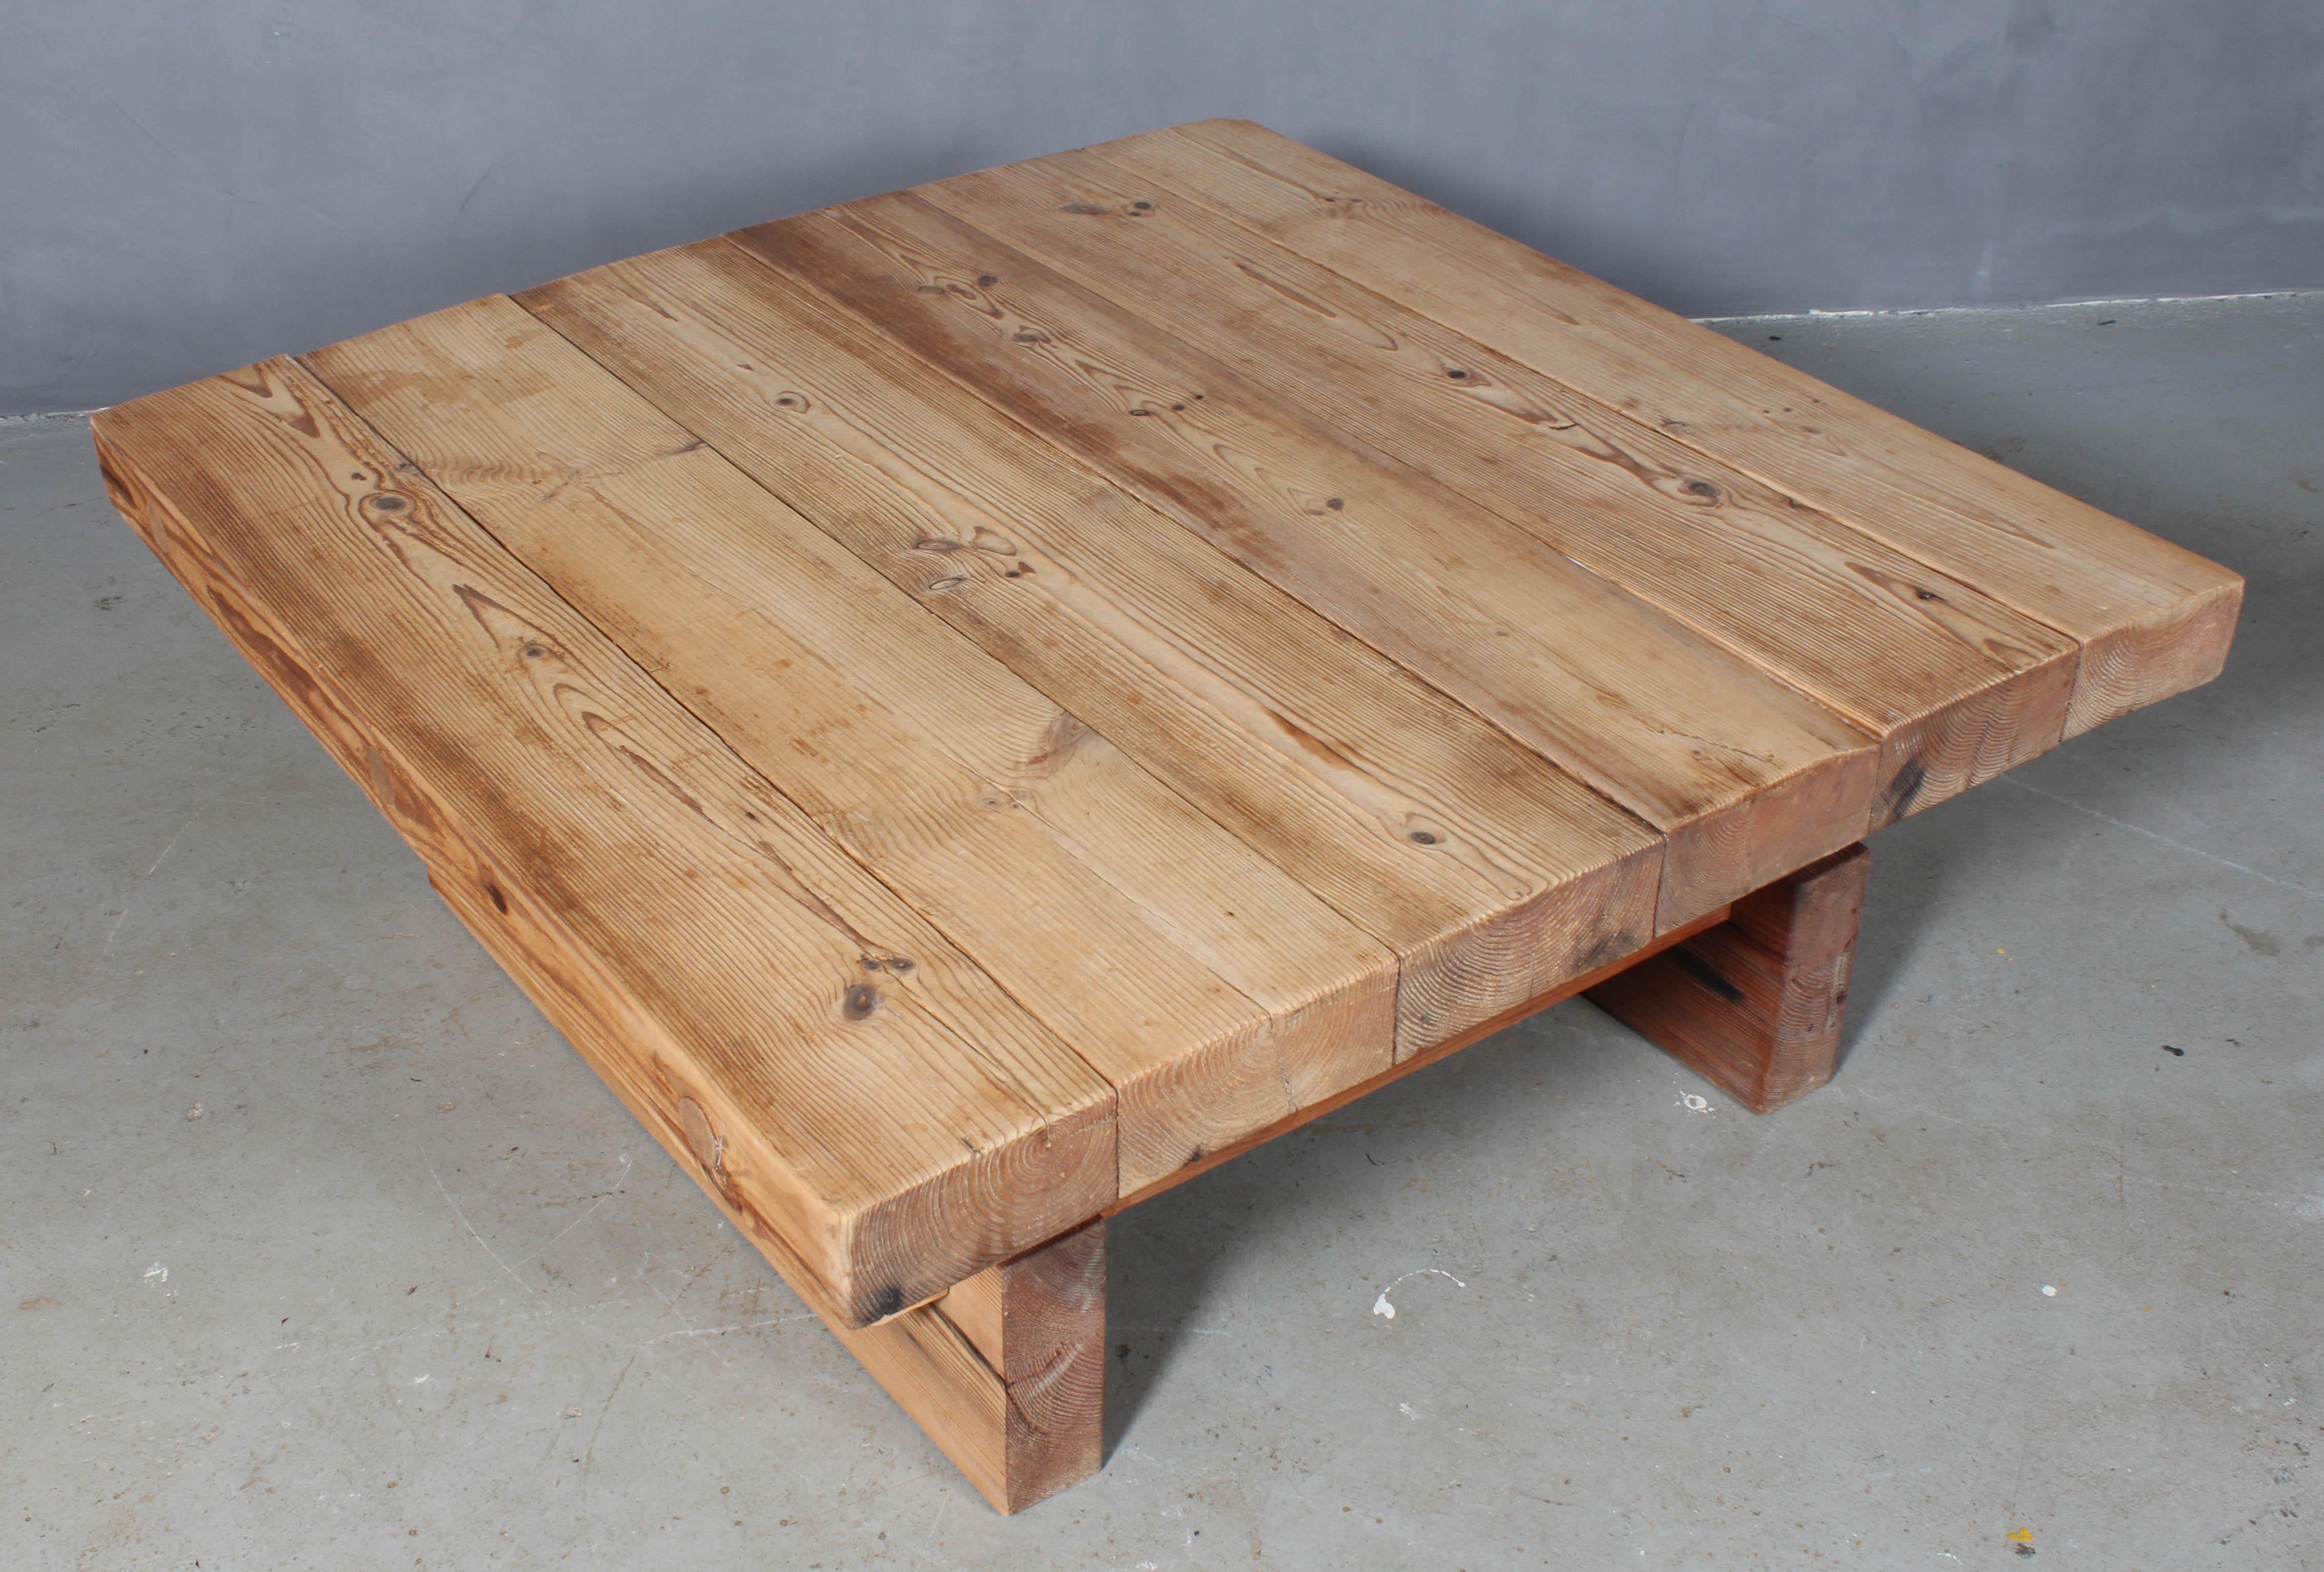 Jens Lyngsøe for Havdrup Trævarefabrik, coffee table made of Pomeranian pine. 

Made of old torn down buildings like the blue and yellow warehouse in Copenhagen, dated to around year 1700.